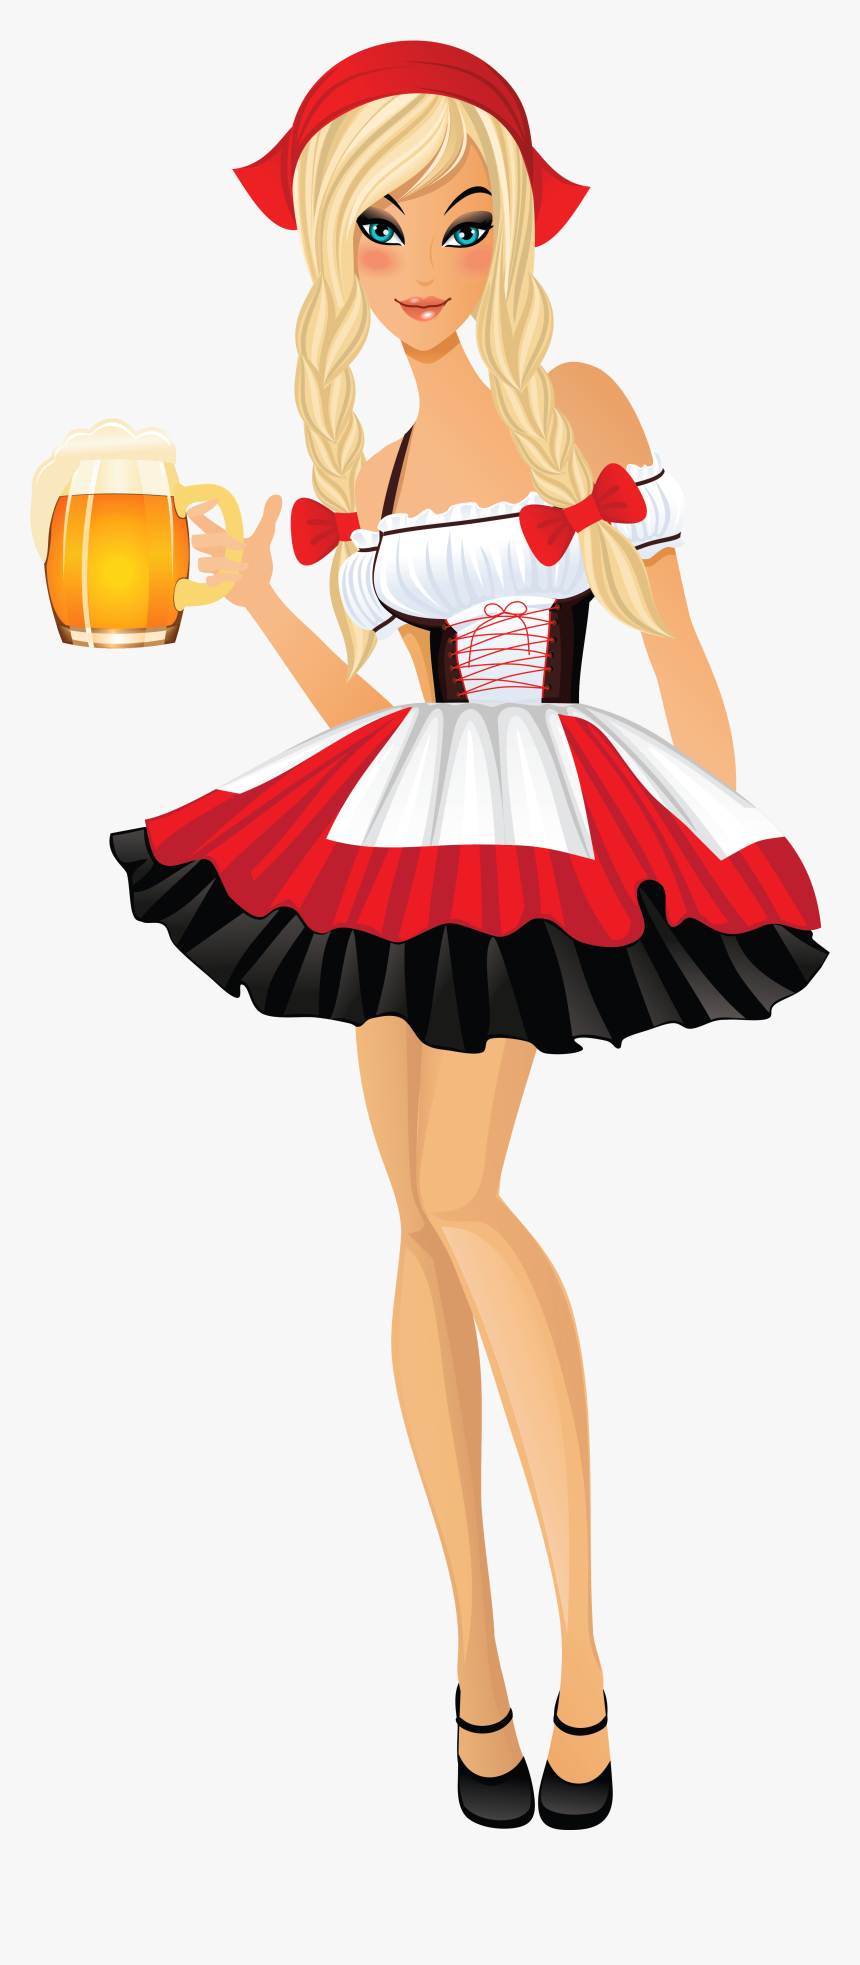 Oktoberfest Girl With Beer Mugs Png Clipart Image - Oktoberfest Lady Png Transparent, Png Download, Free Download